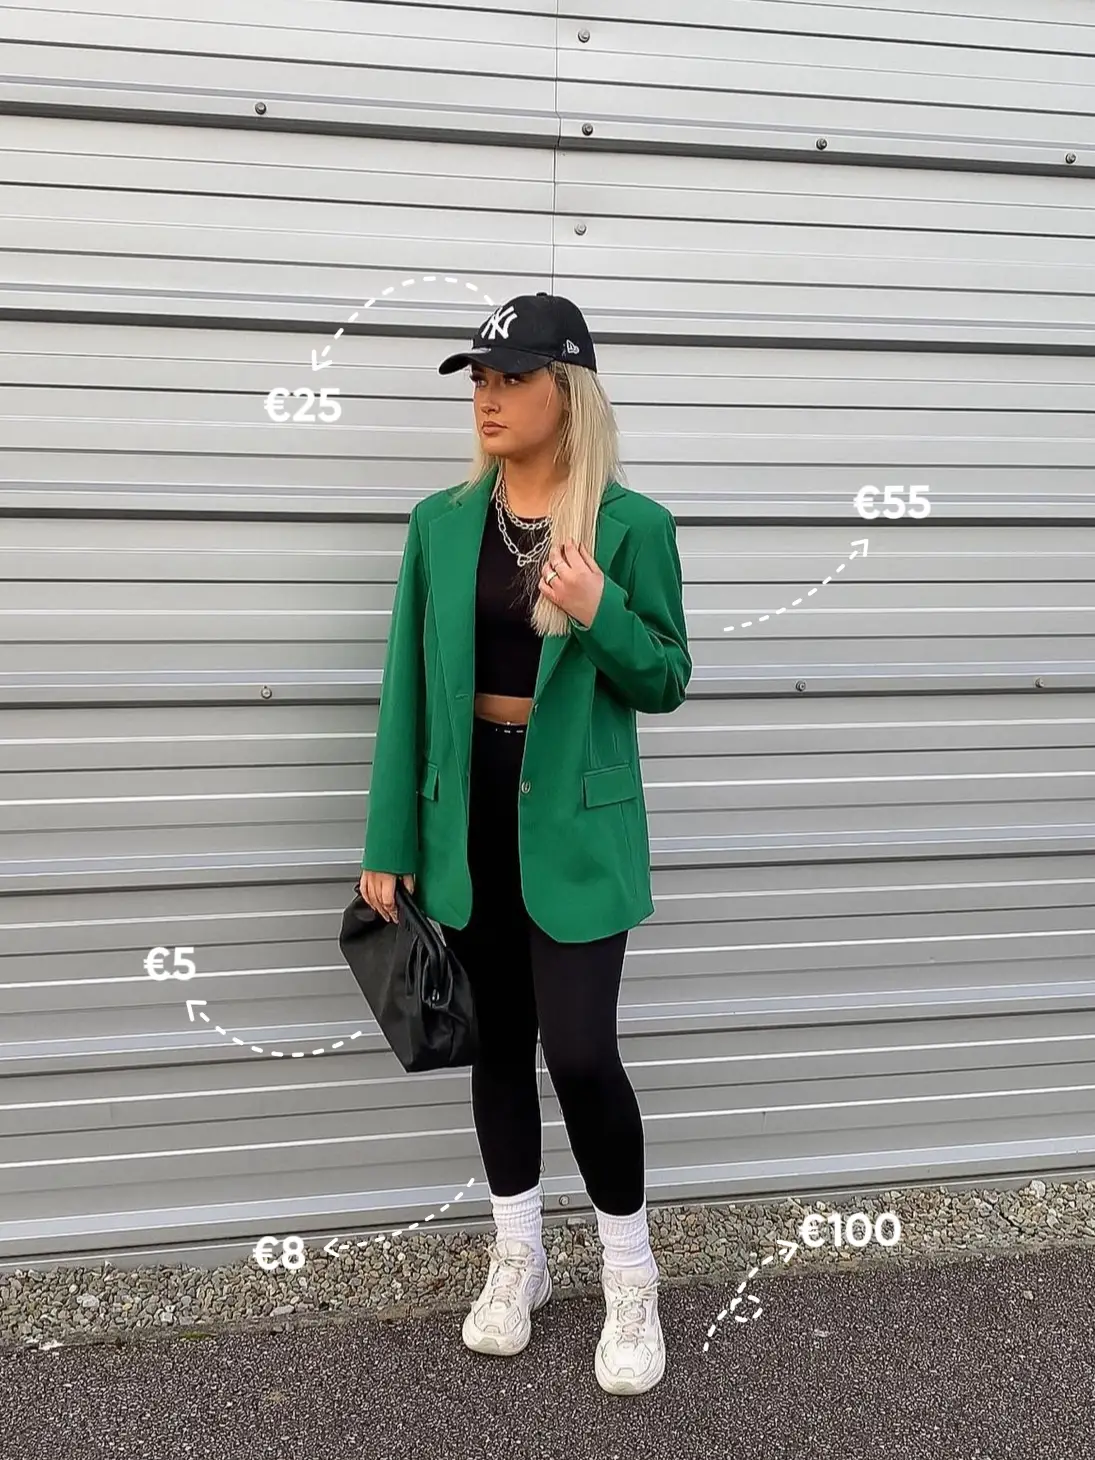 Dark Green Leggings with Blazer Outfits (3 ideas & outfits)